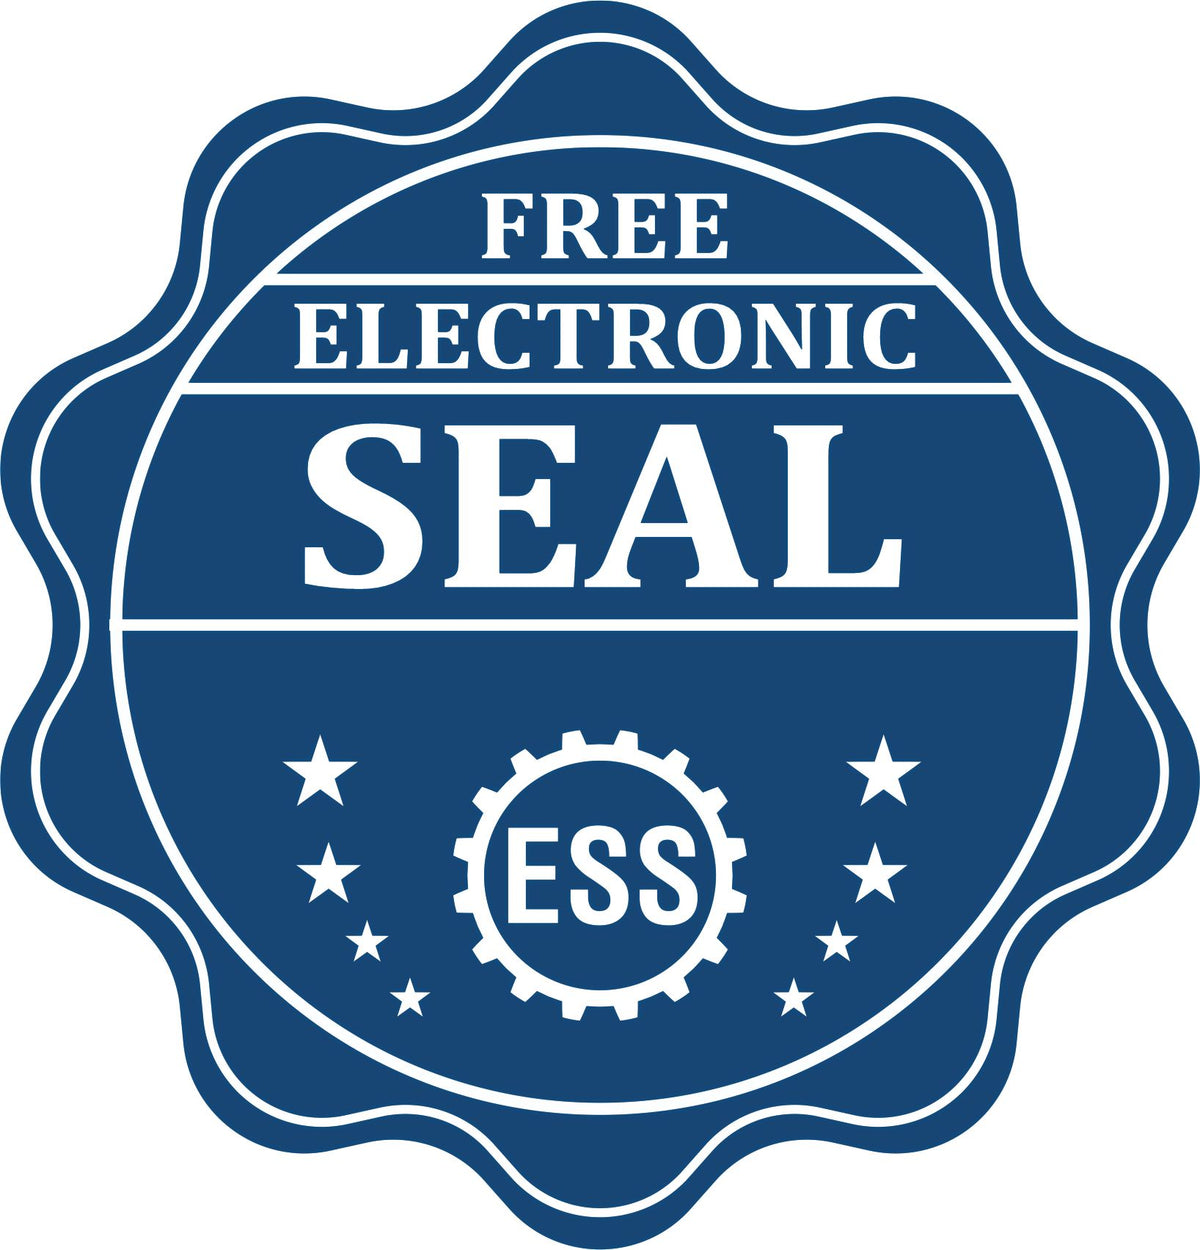 A badge showing a free electronic seal for the Slim Pre-Inked South Carolina Land Surveyor Seal Stamp with stars and the ESS gear on the emblem.